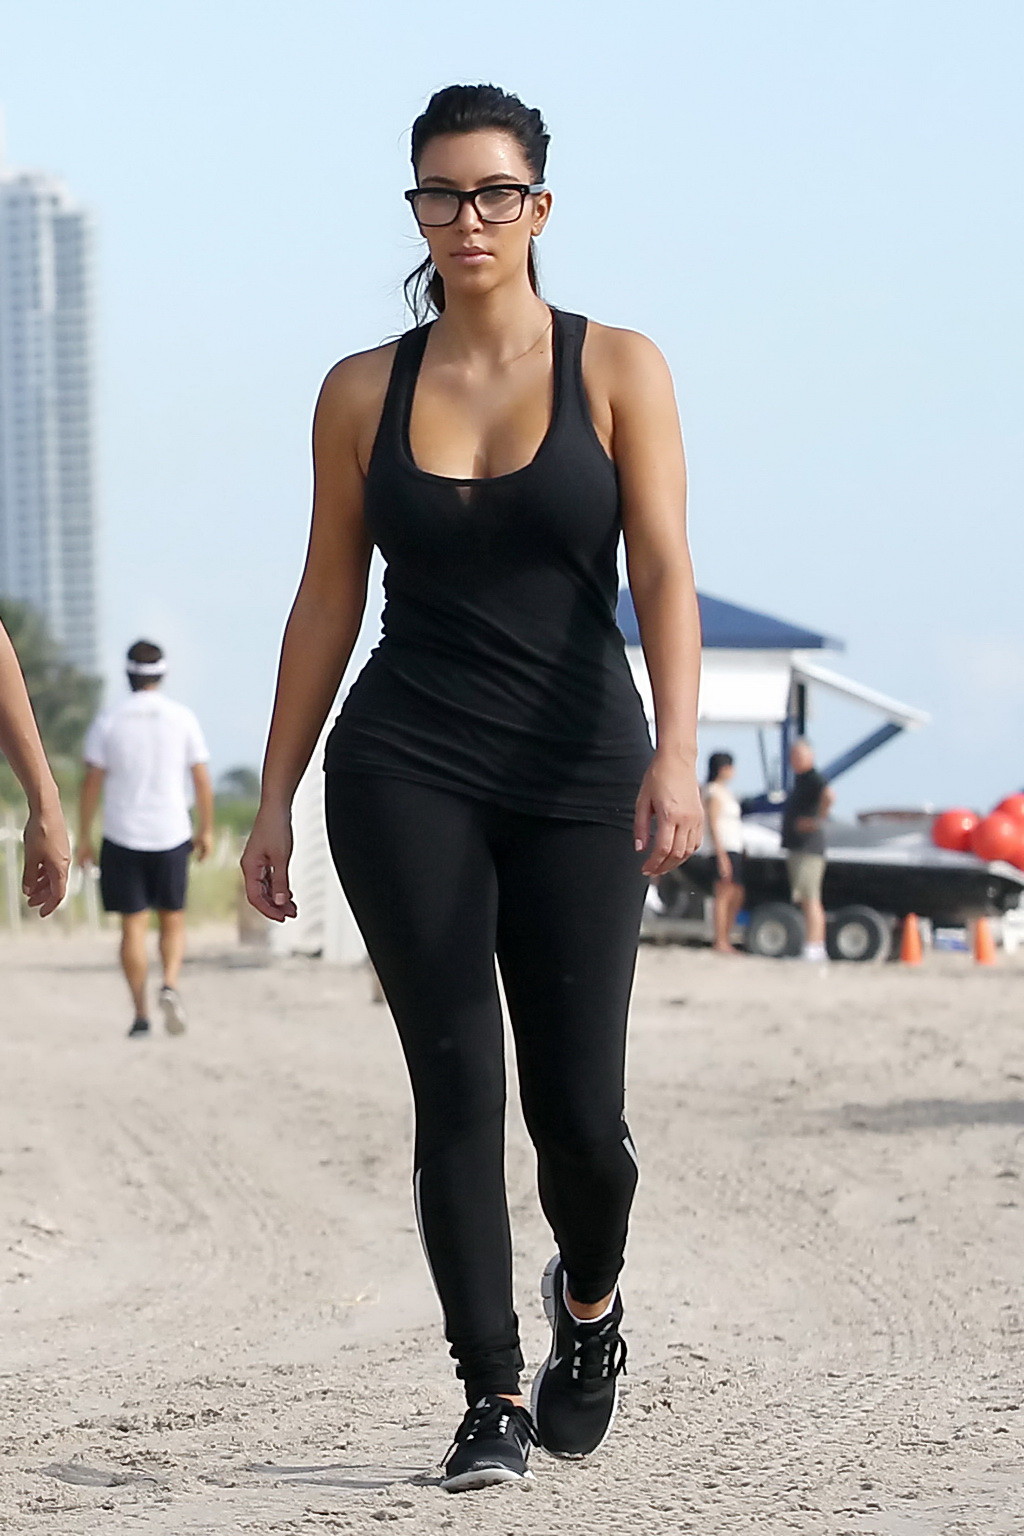 Kim Kardashian showing her huge boobs in tight see-through top and tights while  #75251359